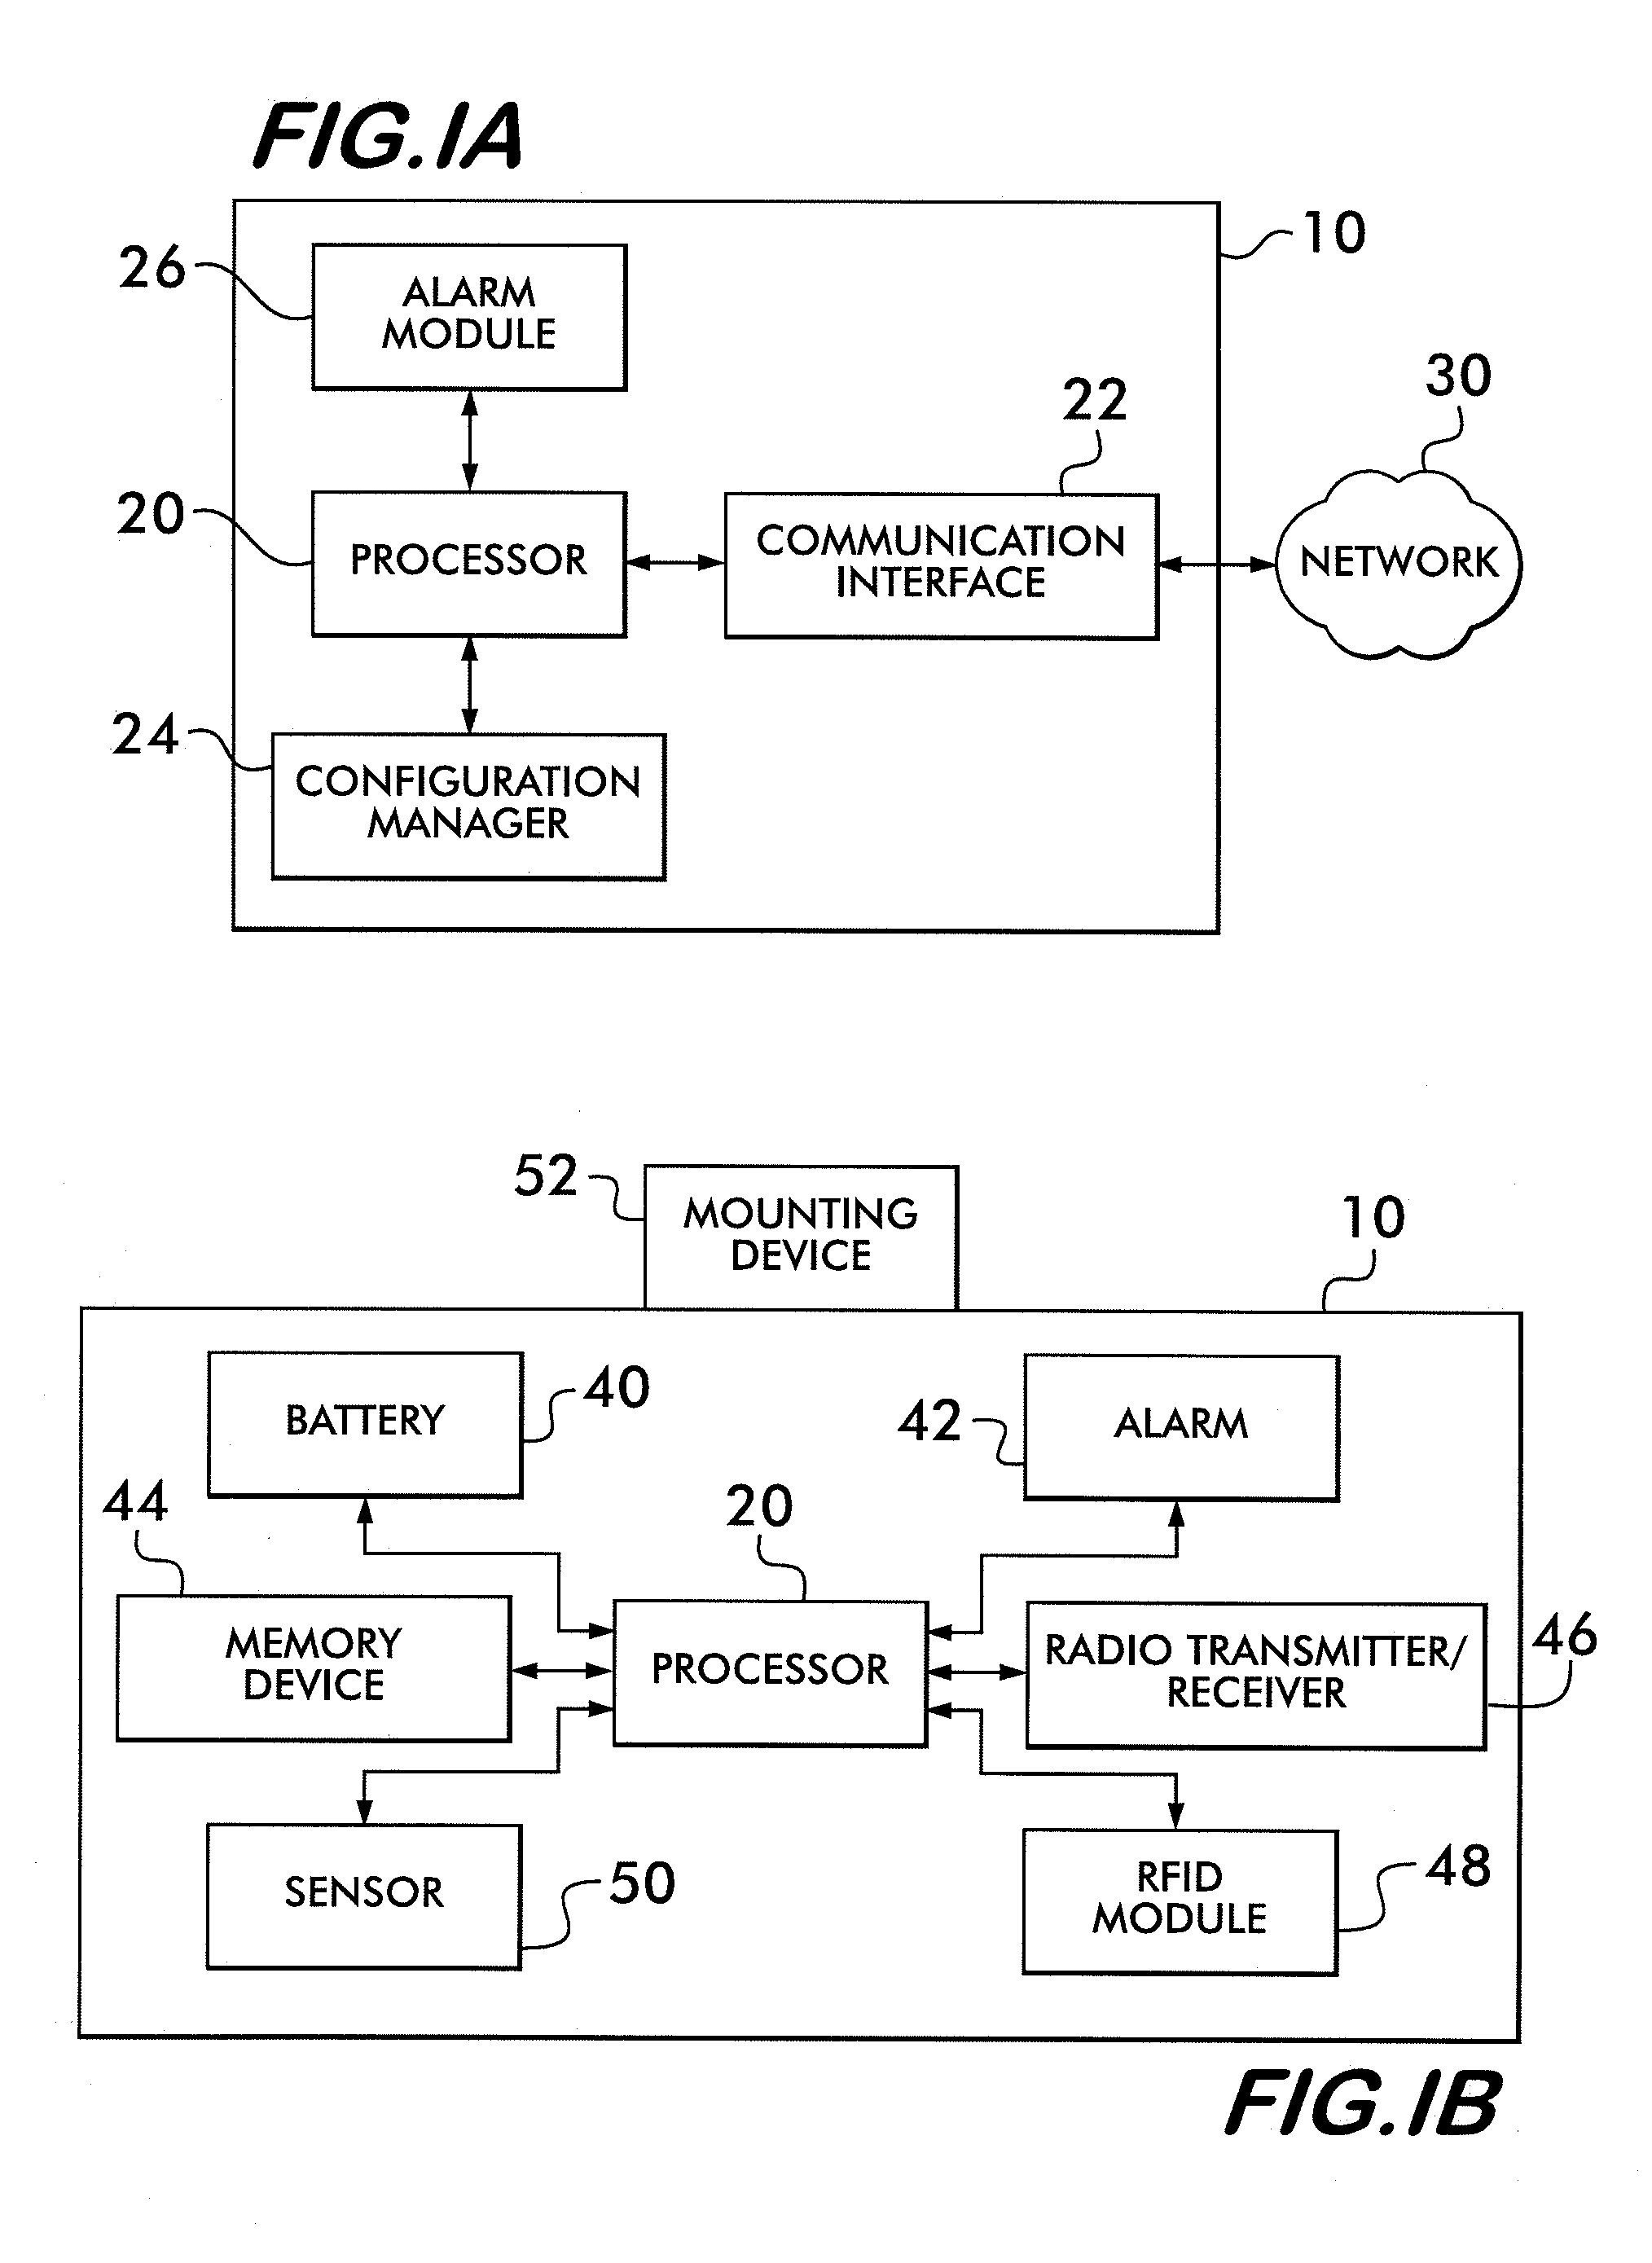 Calibration of Beamforming Nodes in a Configurable Monitoring Device System